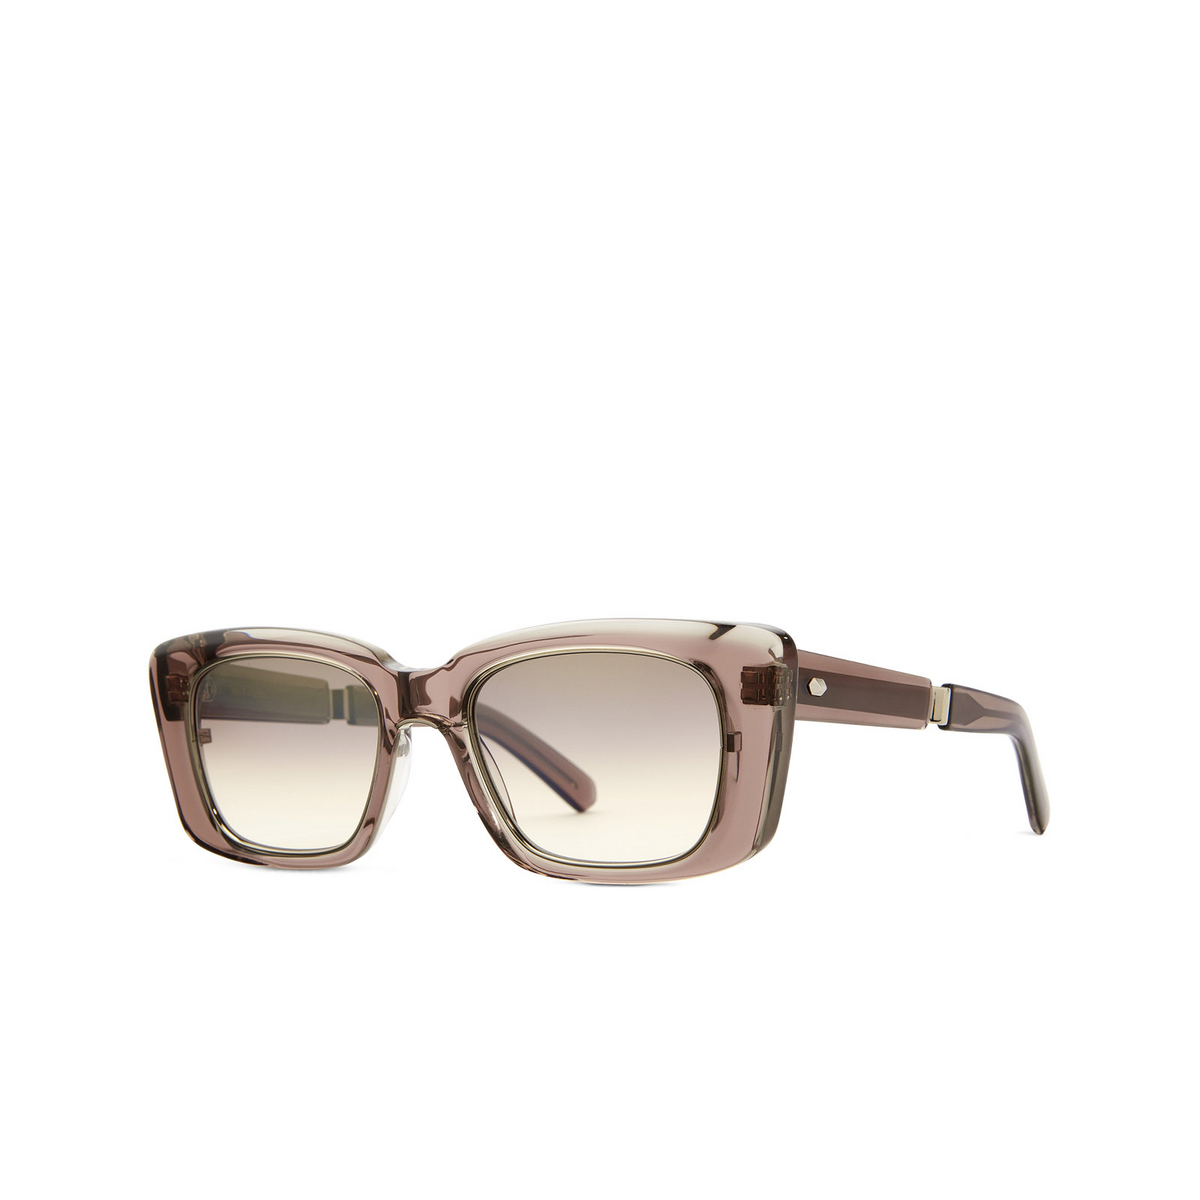 Mr. Leight CARMAN S Sunglasses RCL-12KG/CING Rose Clay-12K White Gold - three-quarters view